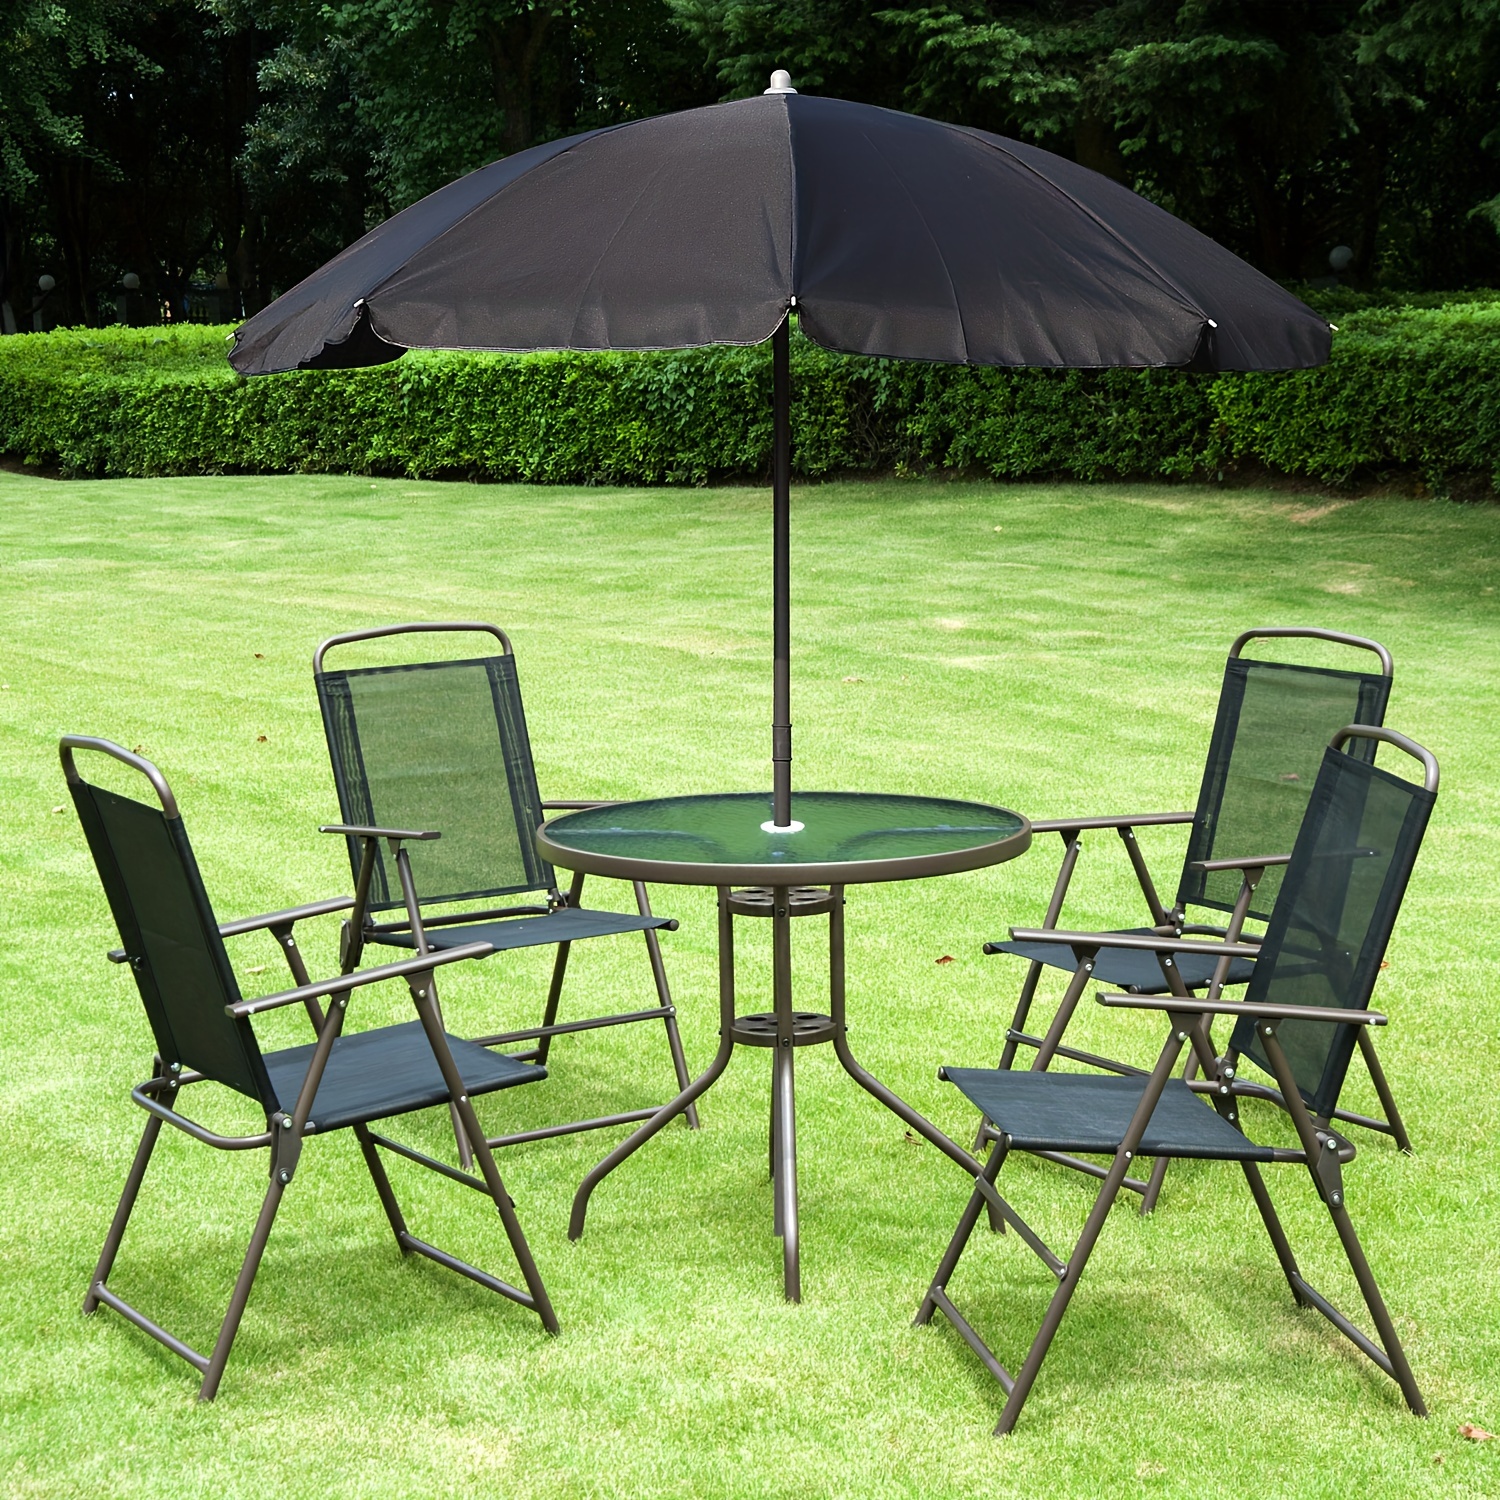 

Outsunny 6 Piece Patio Dining Set For 4 With Umbrella, Outdoor Table And Chairs With 4 Folding Dining Chairs & Round Glass Table For Garden, Backyard And Poolside, Black